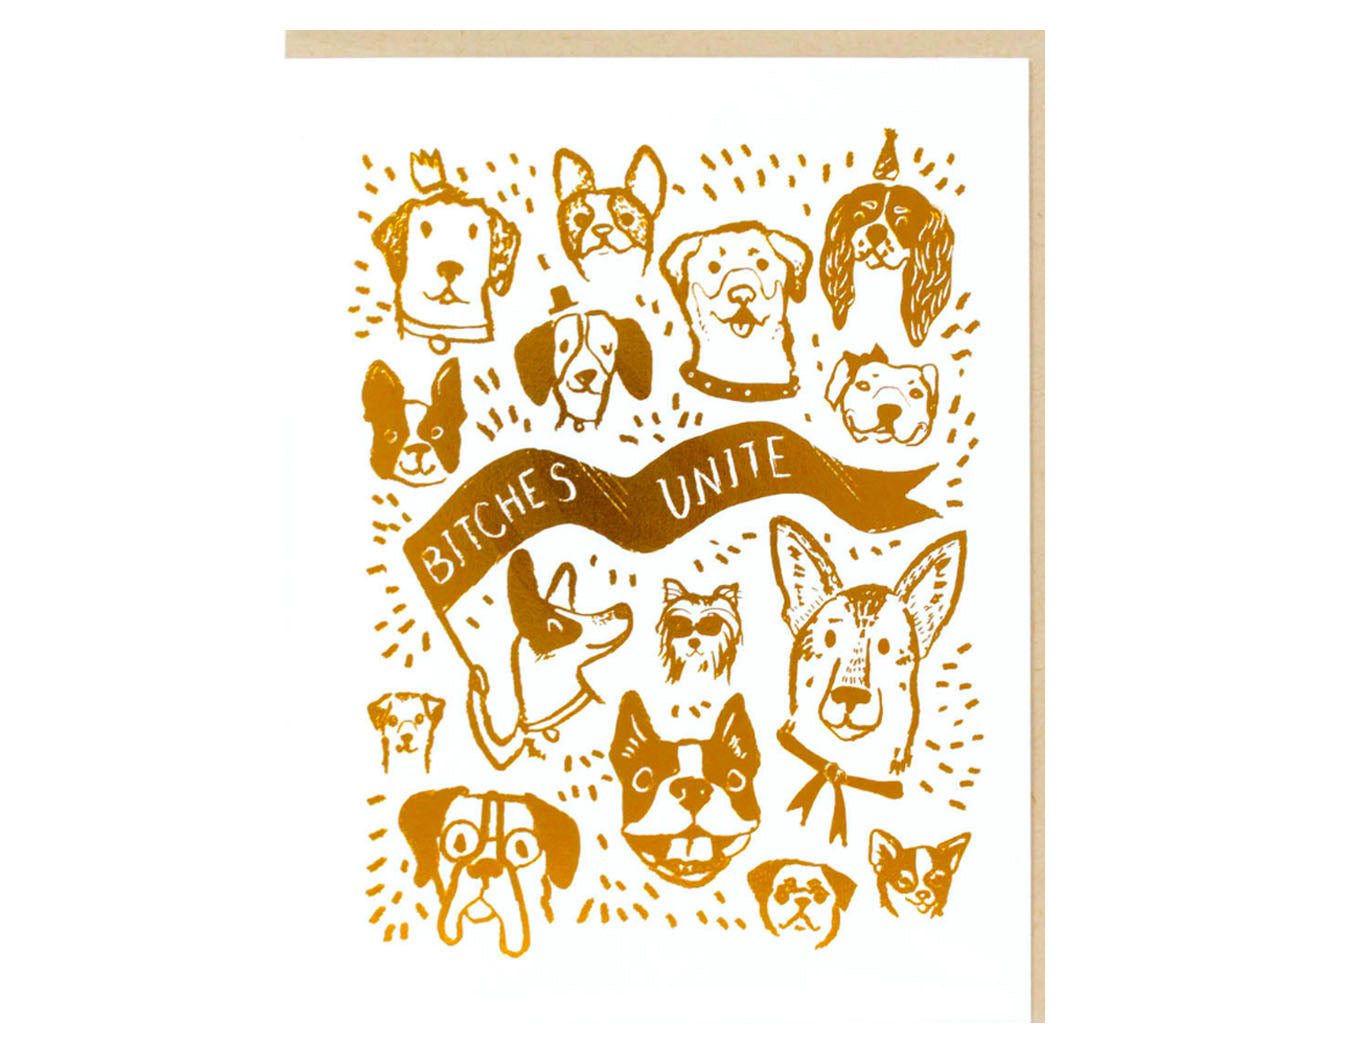 gold foil printed, white background illustrated dog faces text reads bitches unite